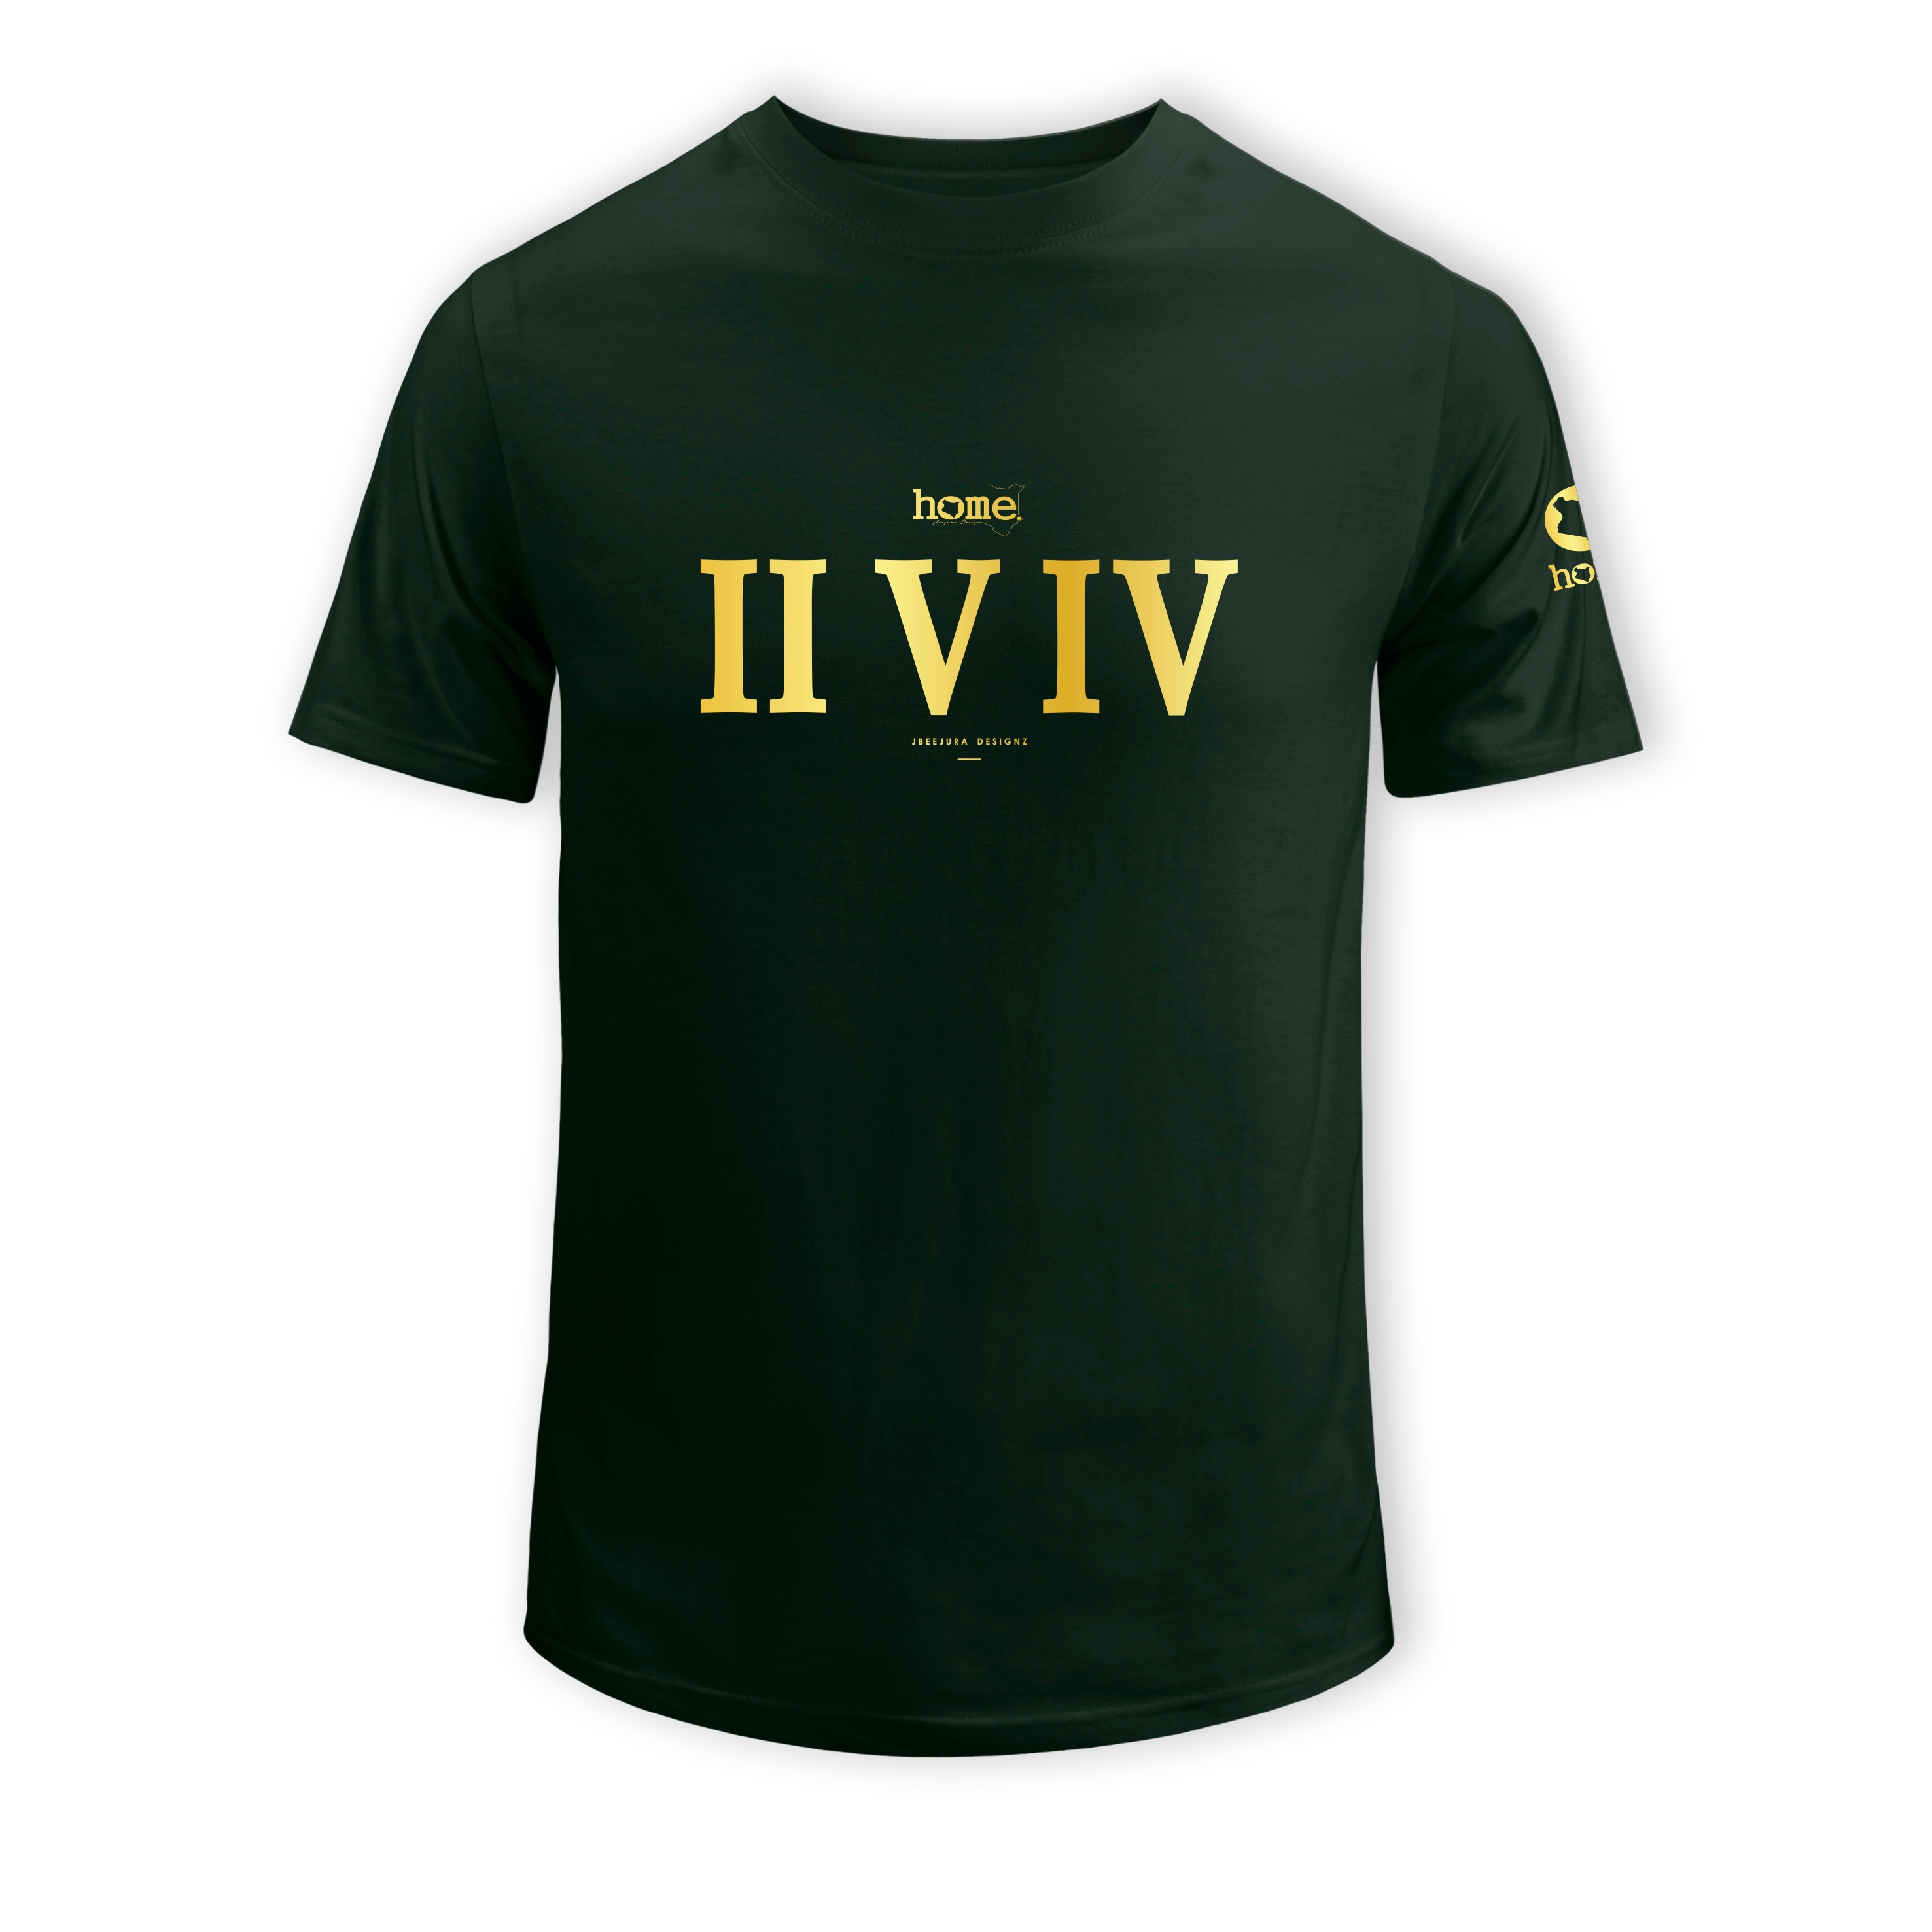 home_254 SHORT-SLEEVED FOREST GREEN T-SHIRT WITH A GOLD ROMAN NUMERLS PRINT – COTTON PLUS FABRIC